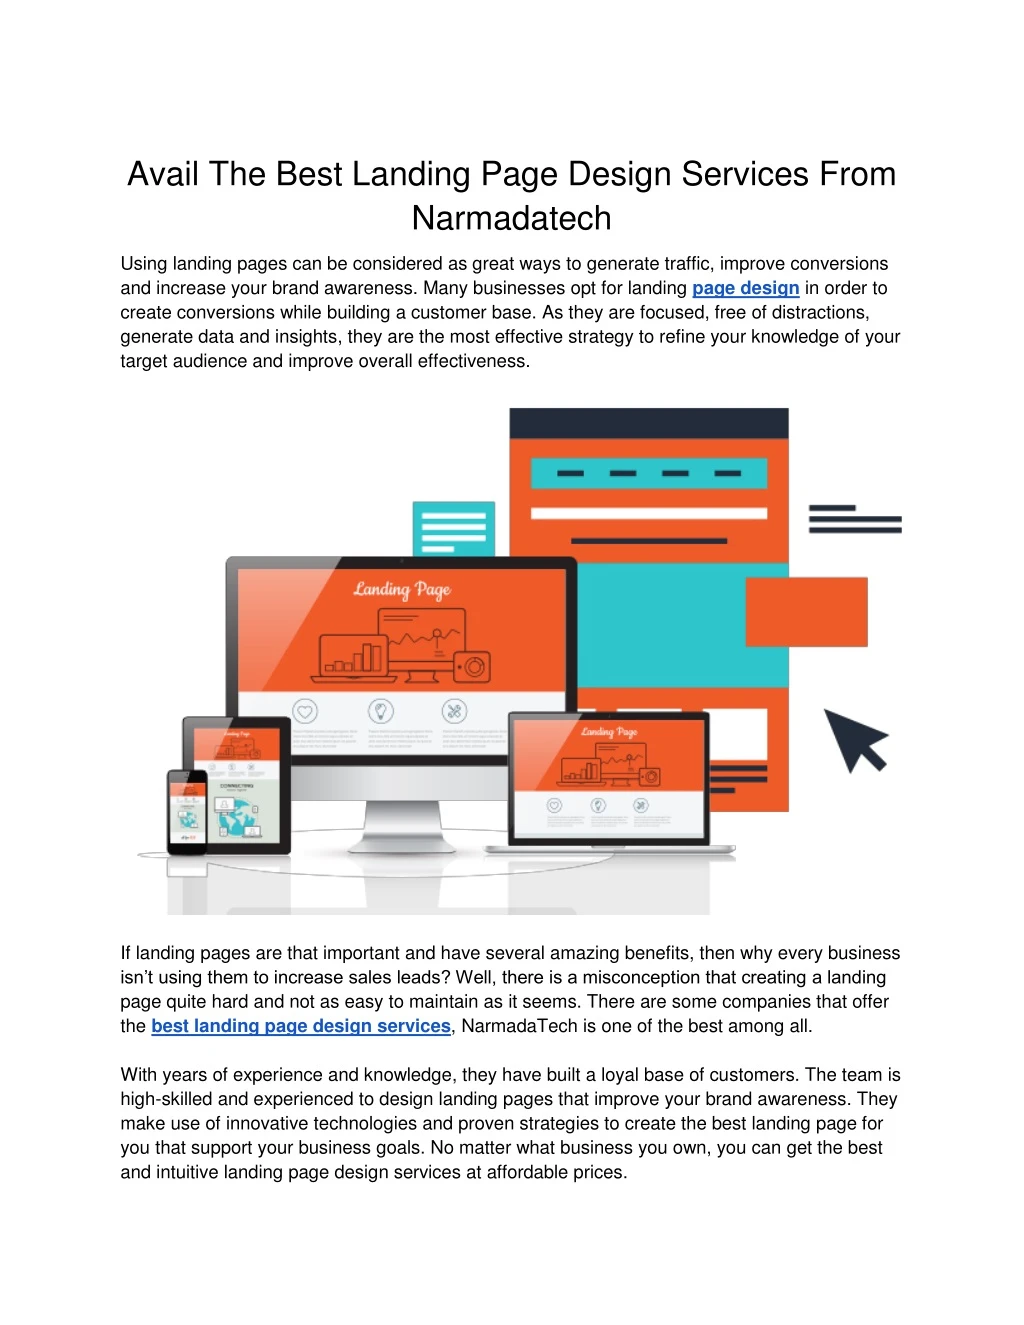 avail the best landing page design services from